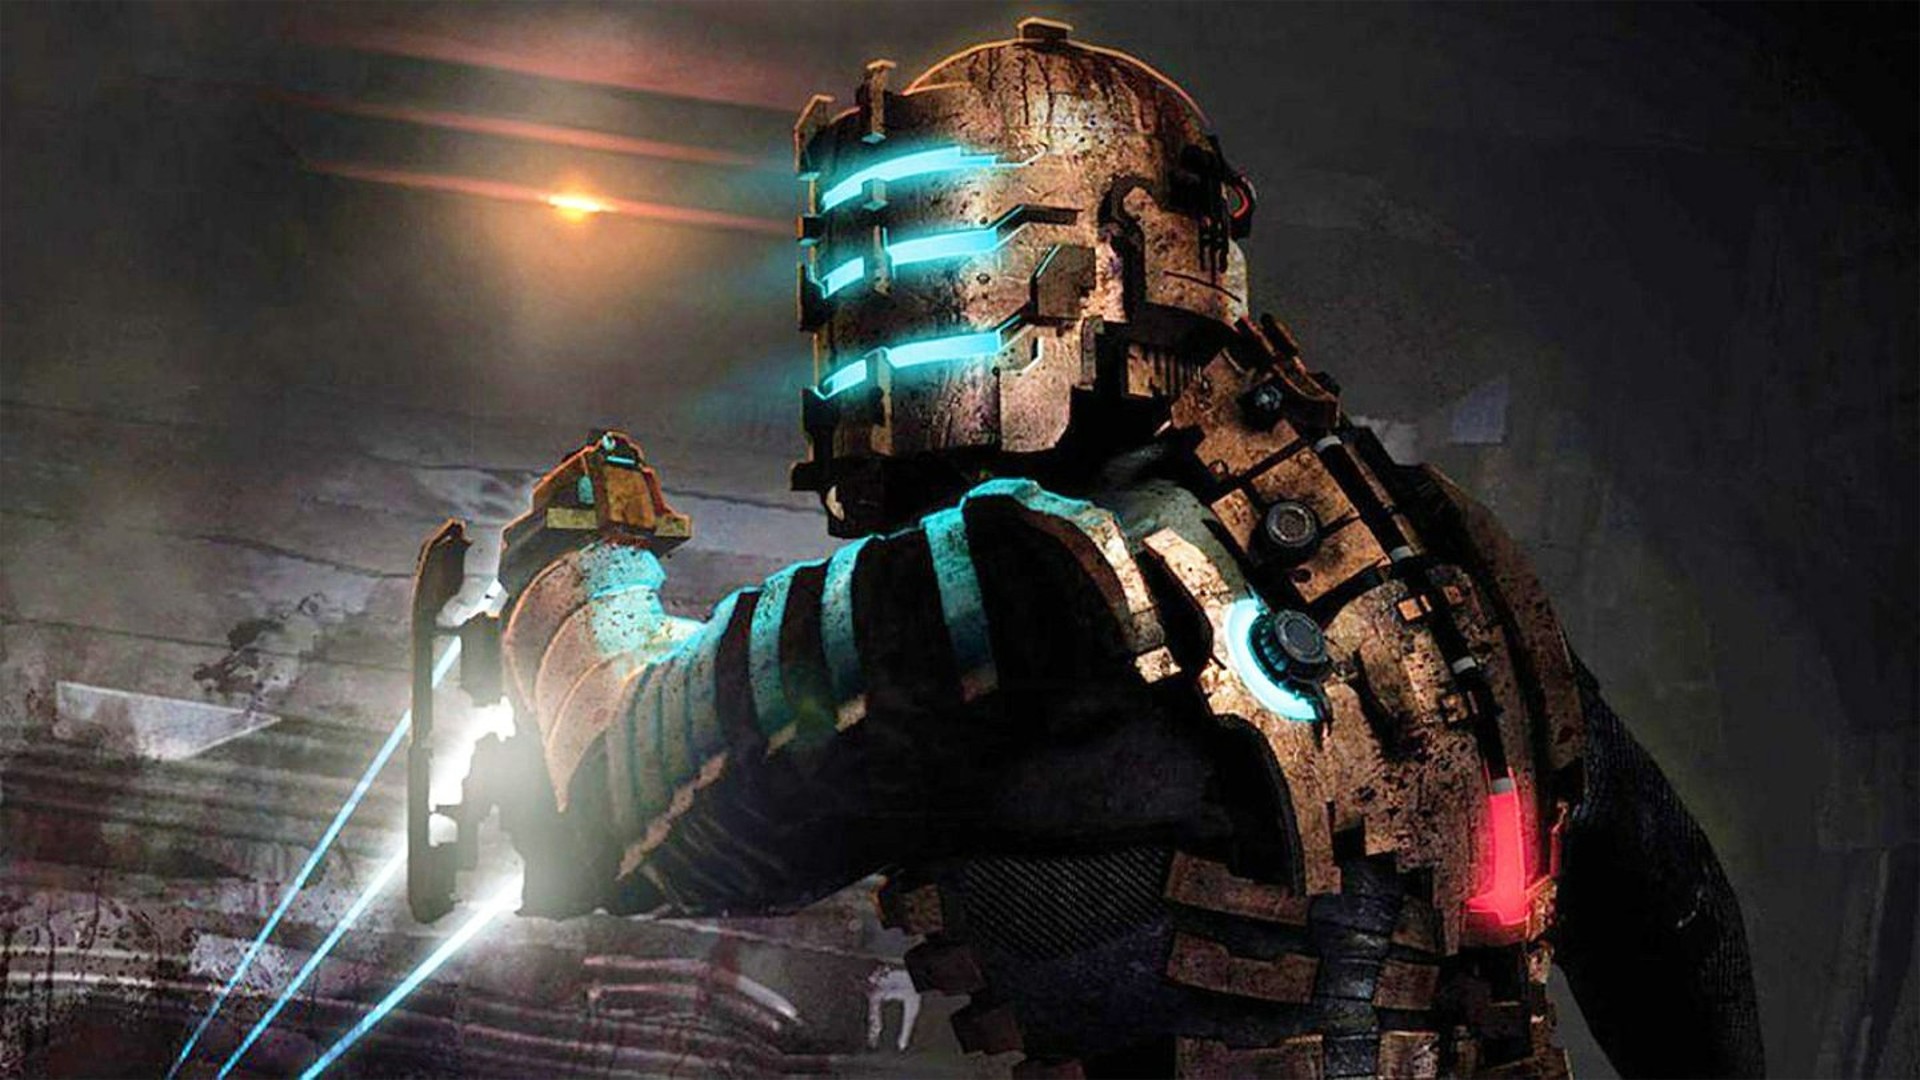 Dead Space Remake lets you completely remove gore, for better or worse